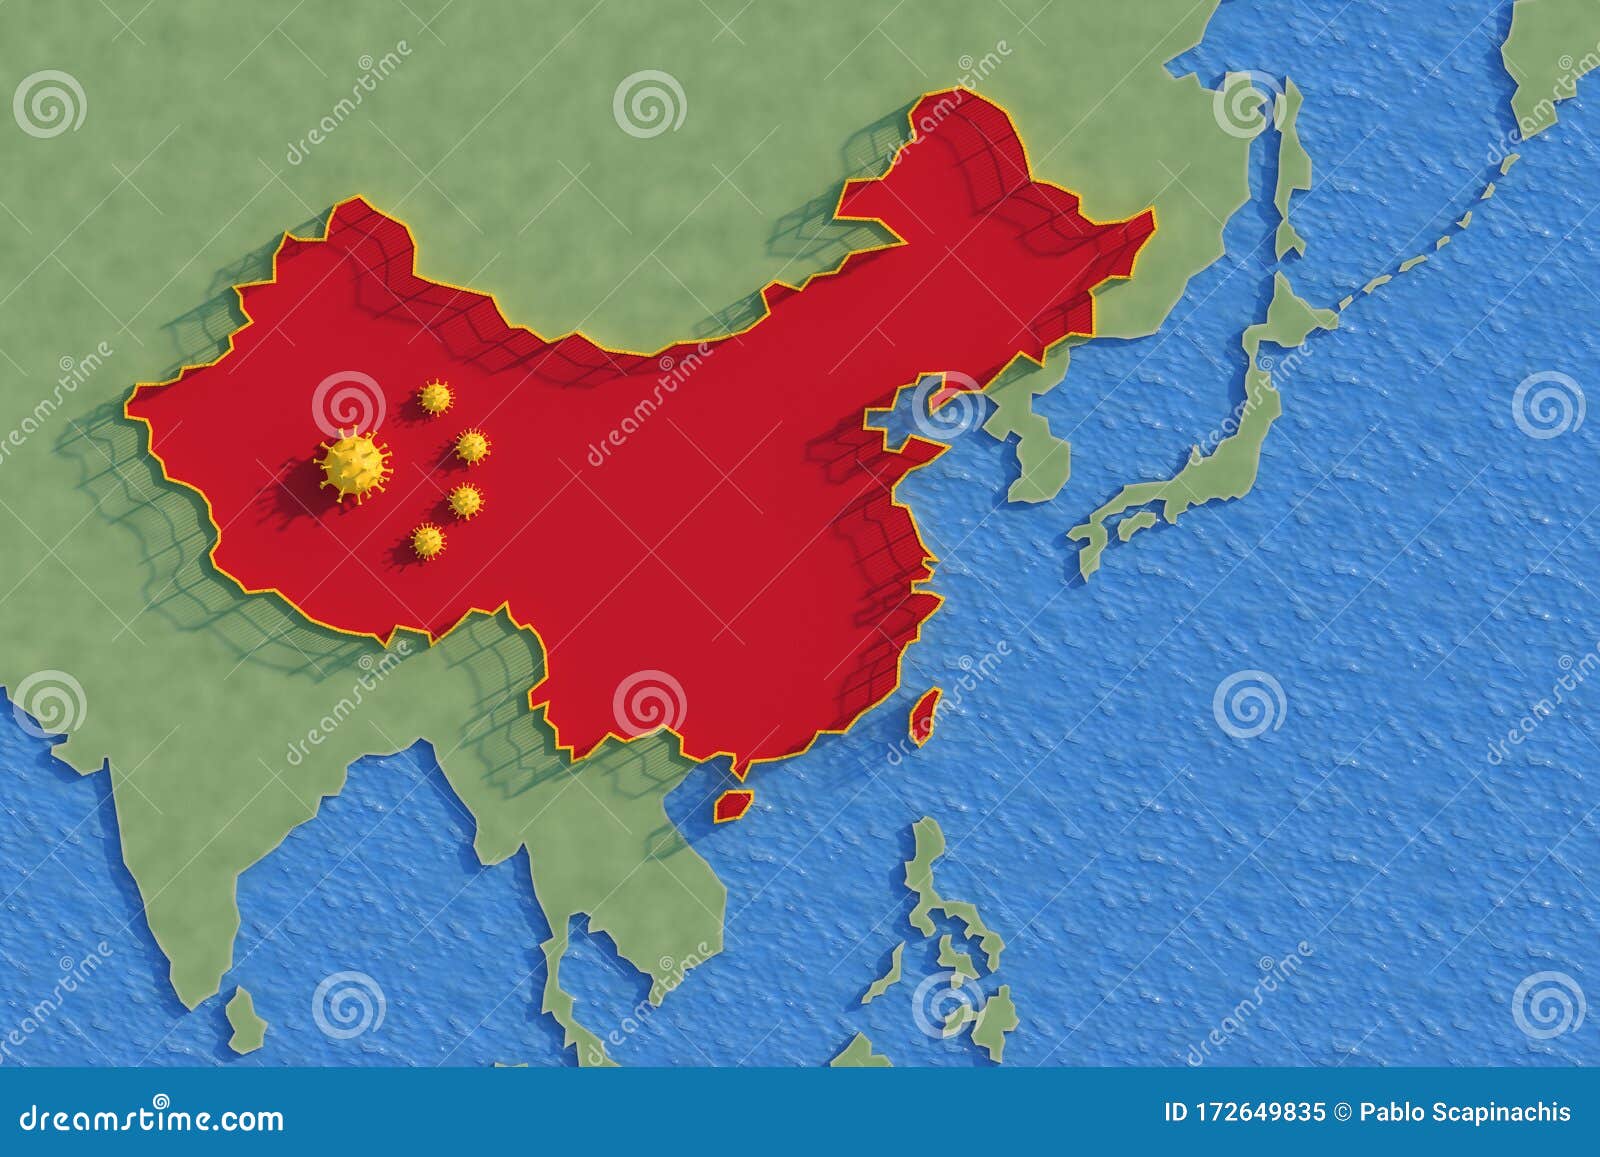 Concept Map Of Republic Of China Isolated From The Rest Of The World By A Fence Or Jail Because Of The Coronavirus Stock Illustration Illustration Of Frontier Contamination